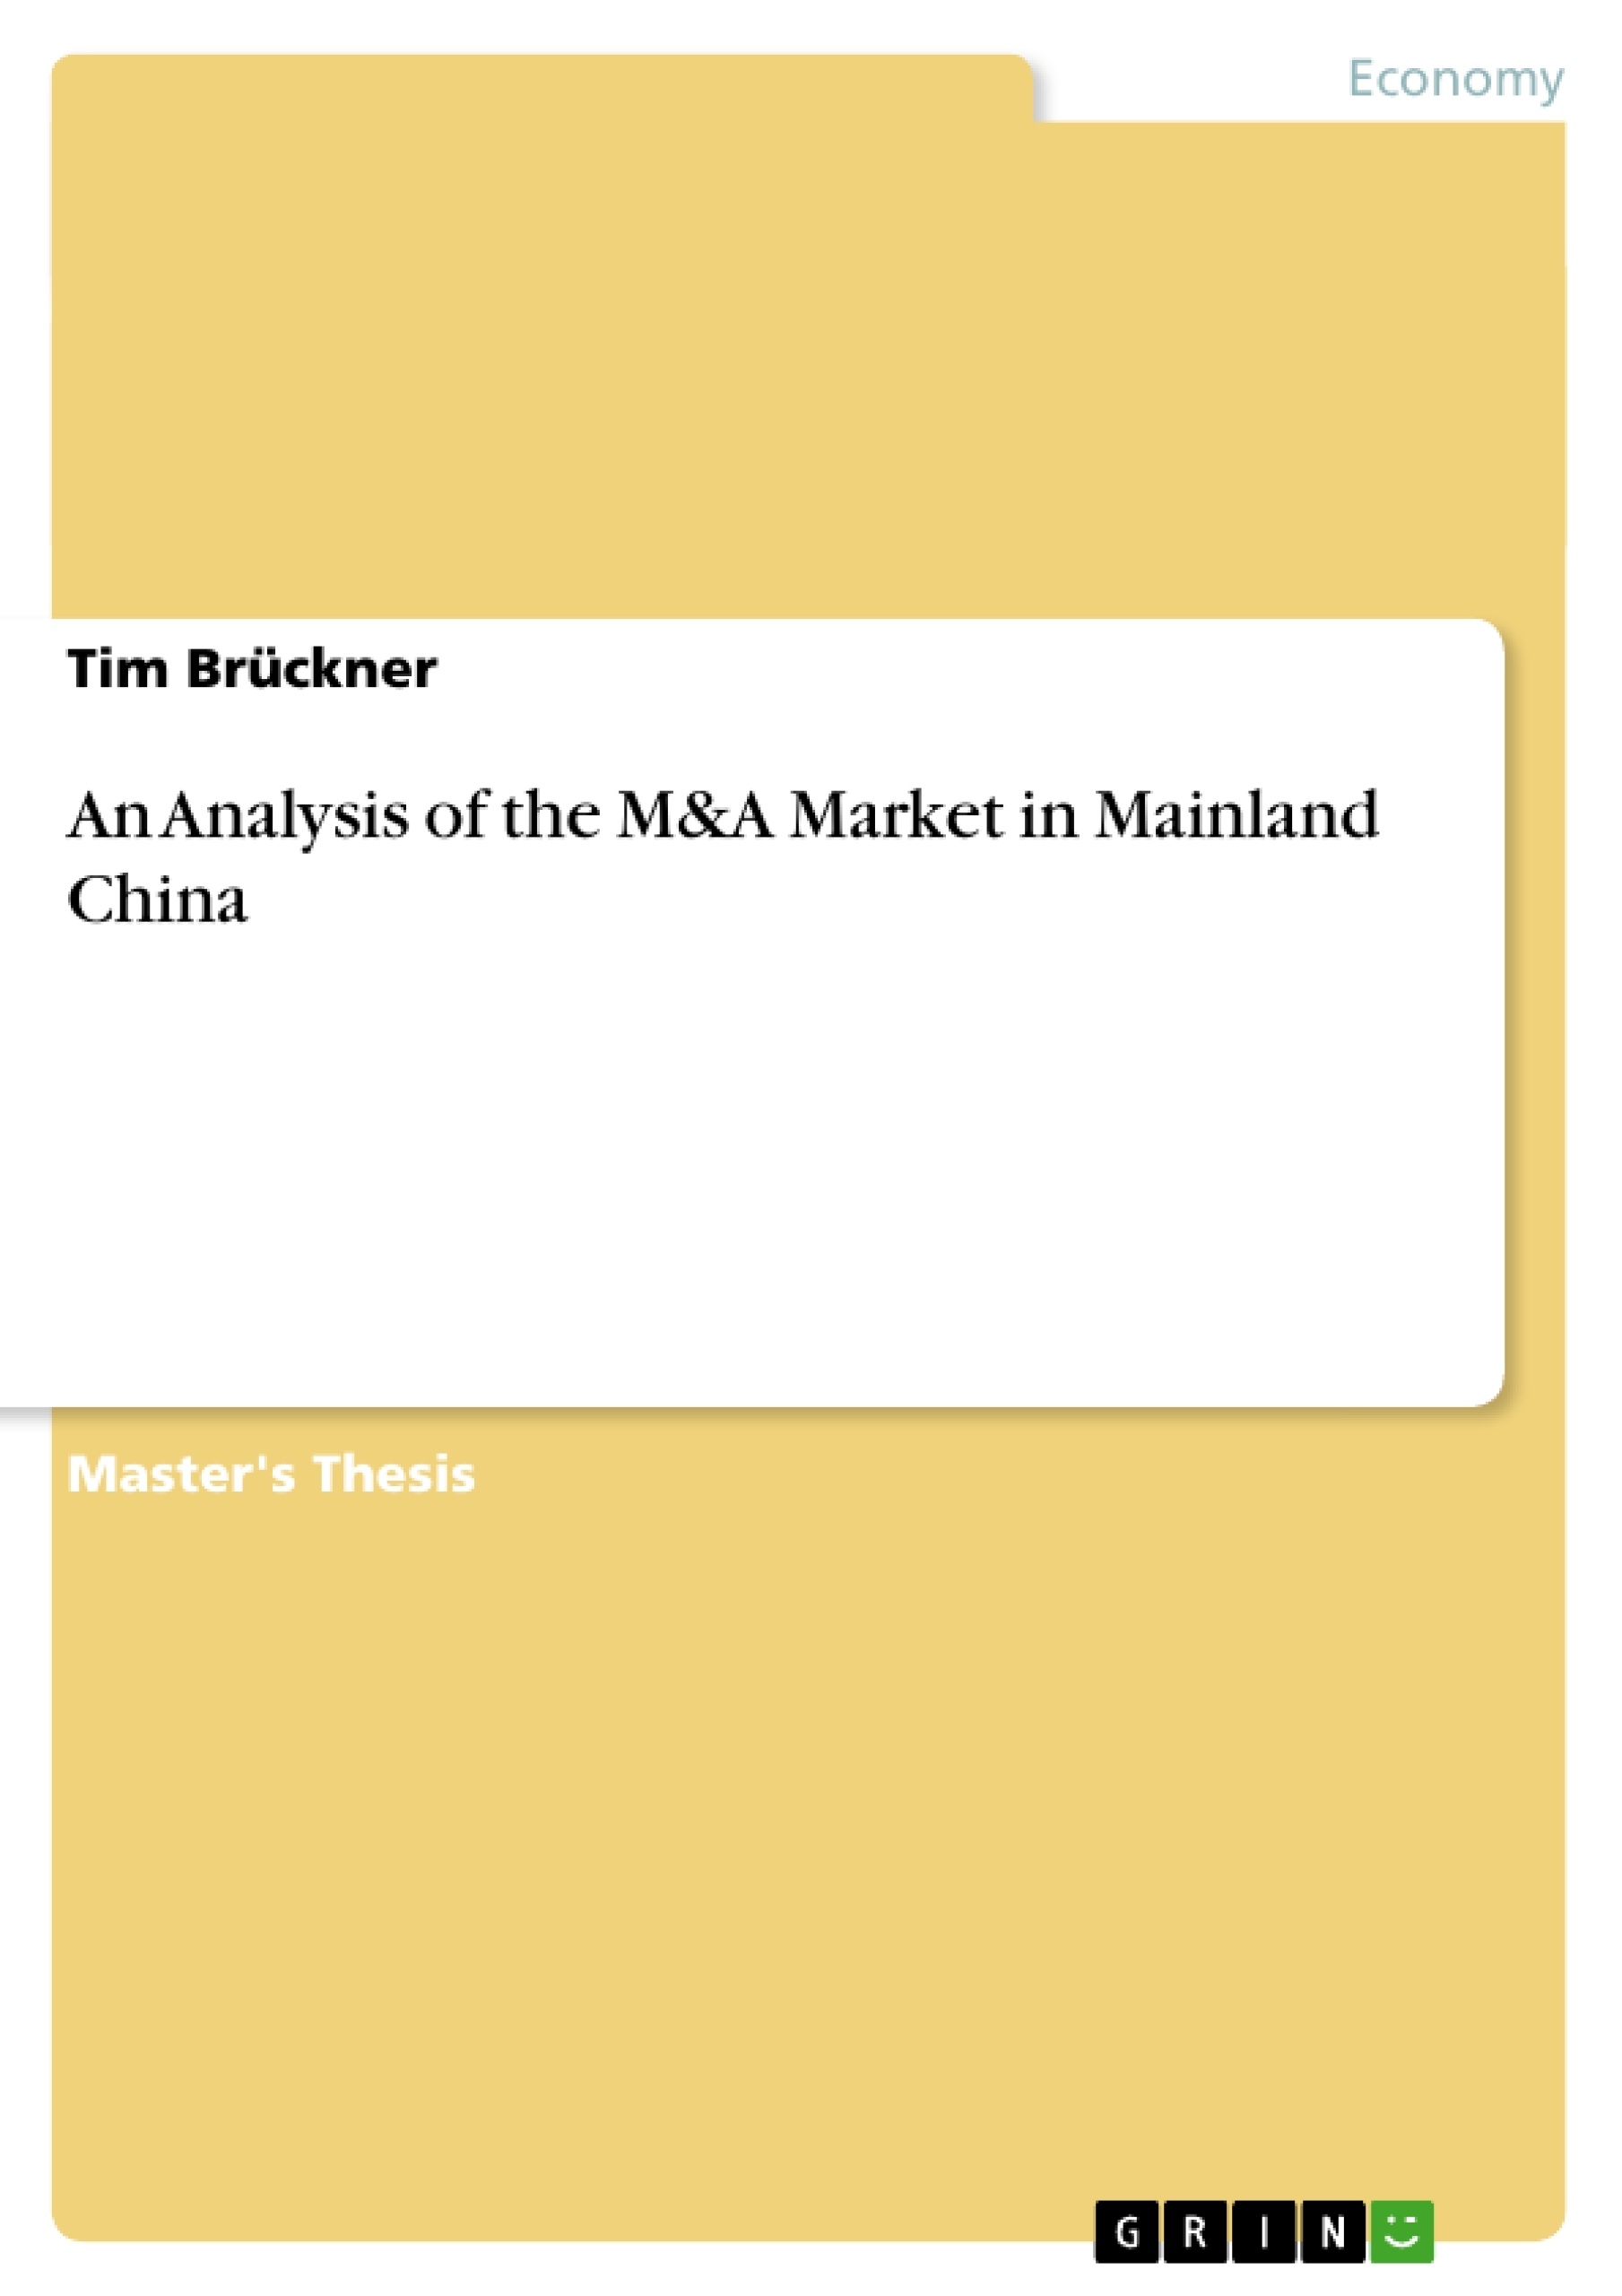 Título: An Analysis of the M&A Market in Mainland China